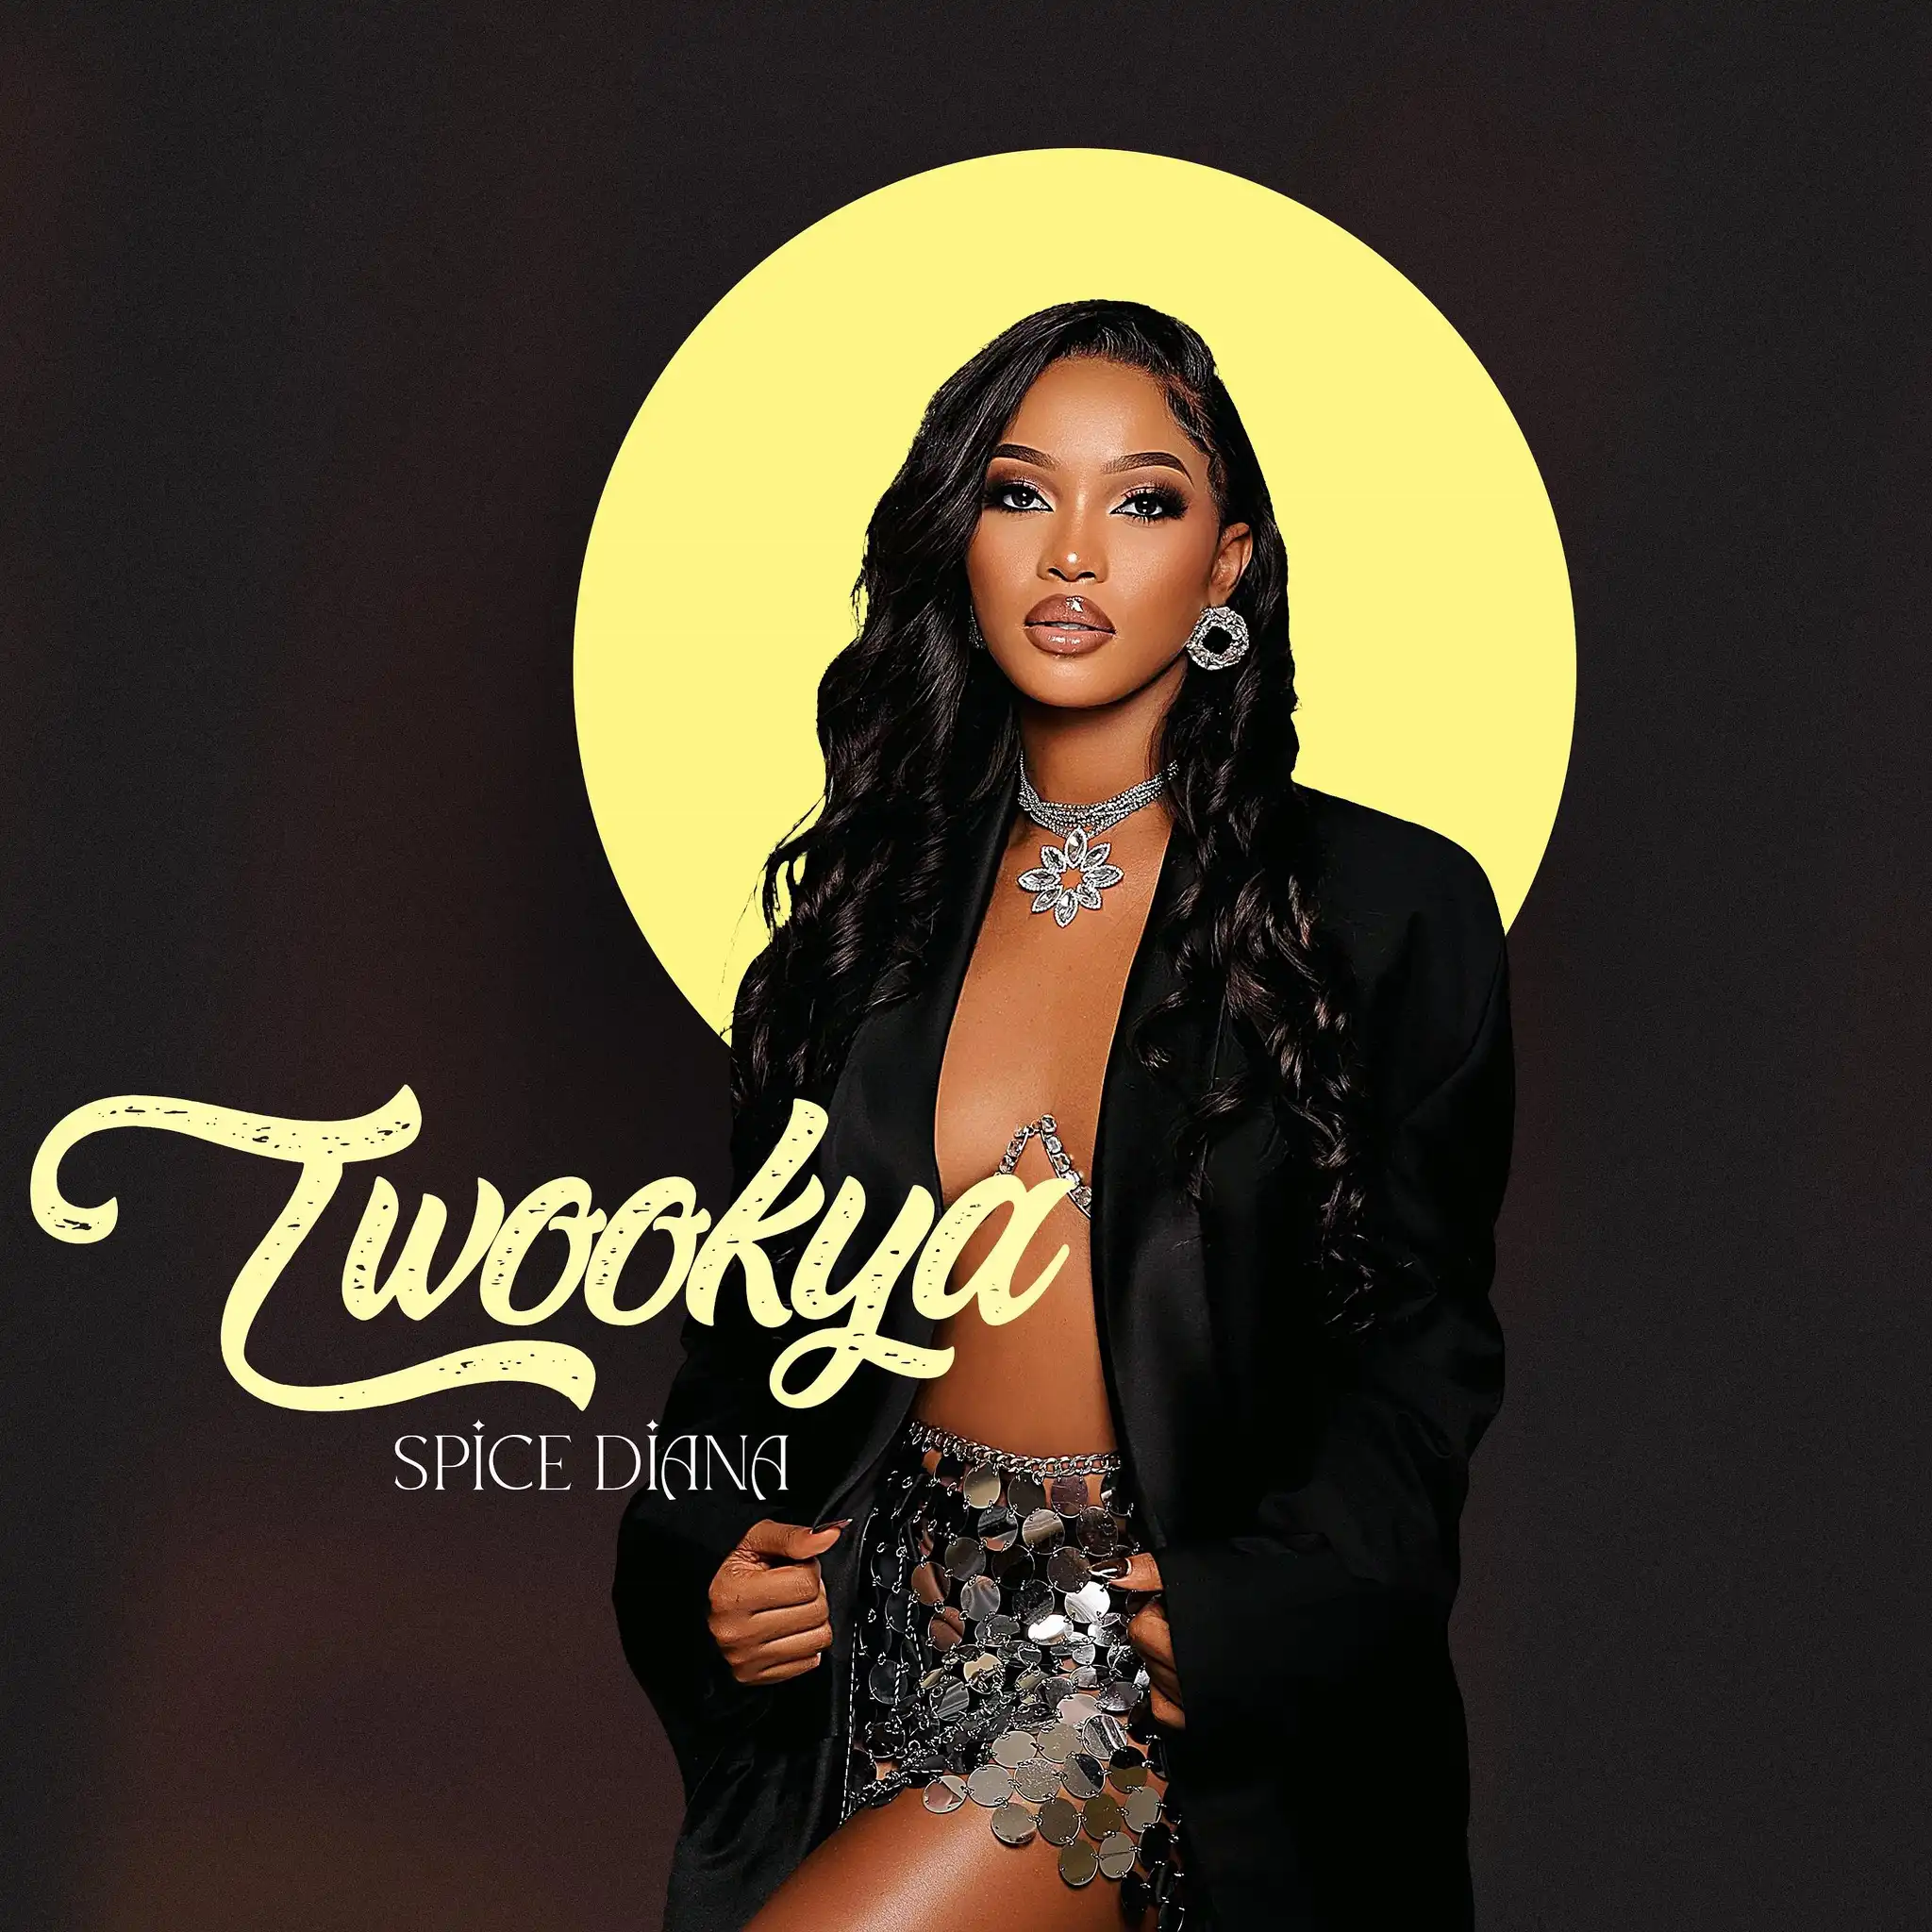 spice-diana-twookya-album-cover